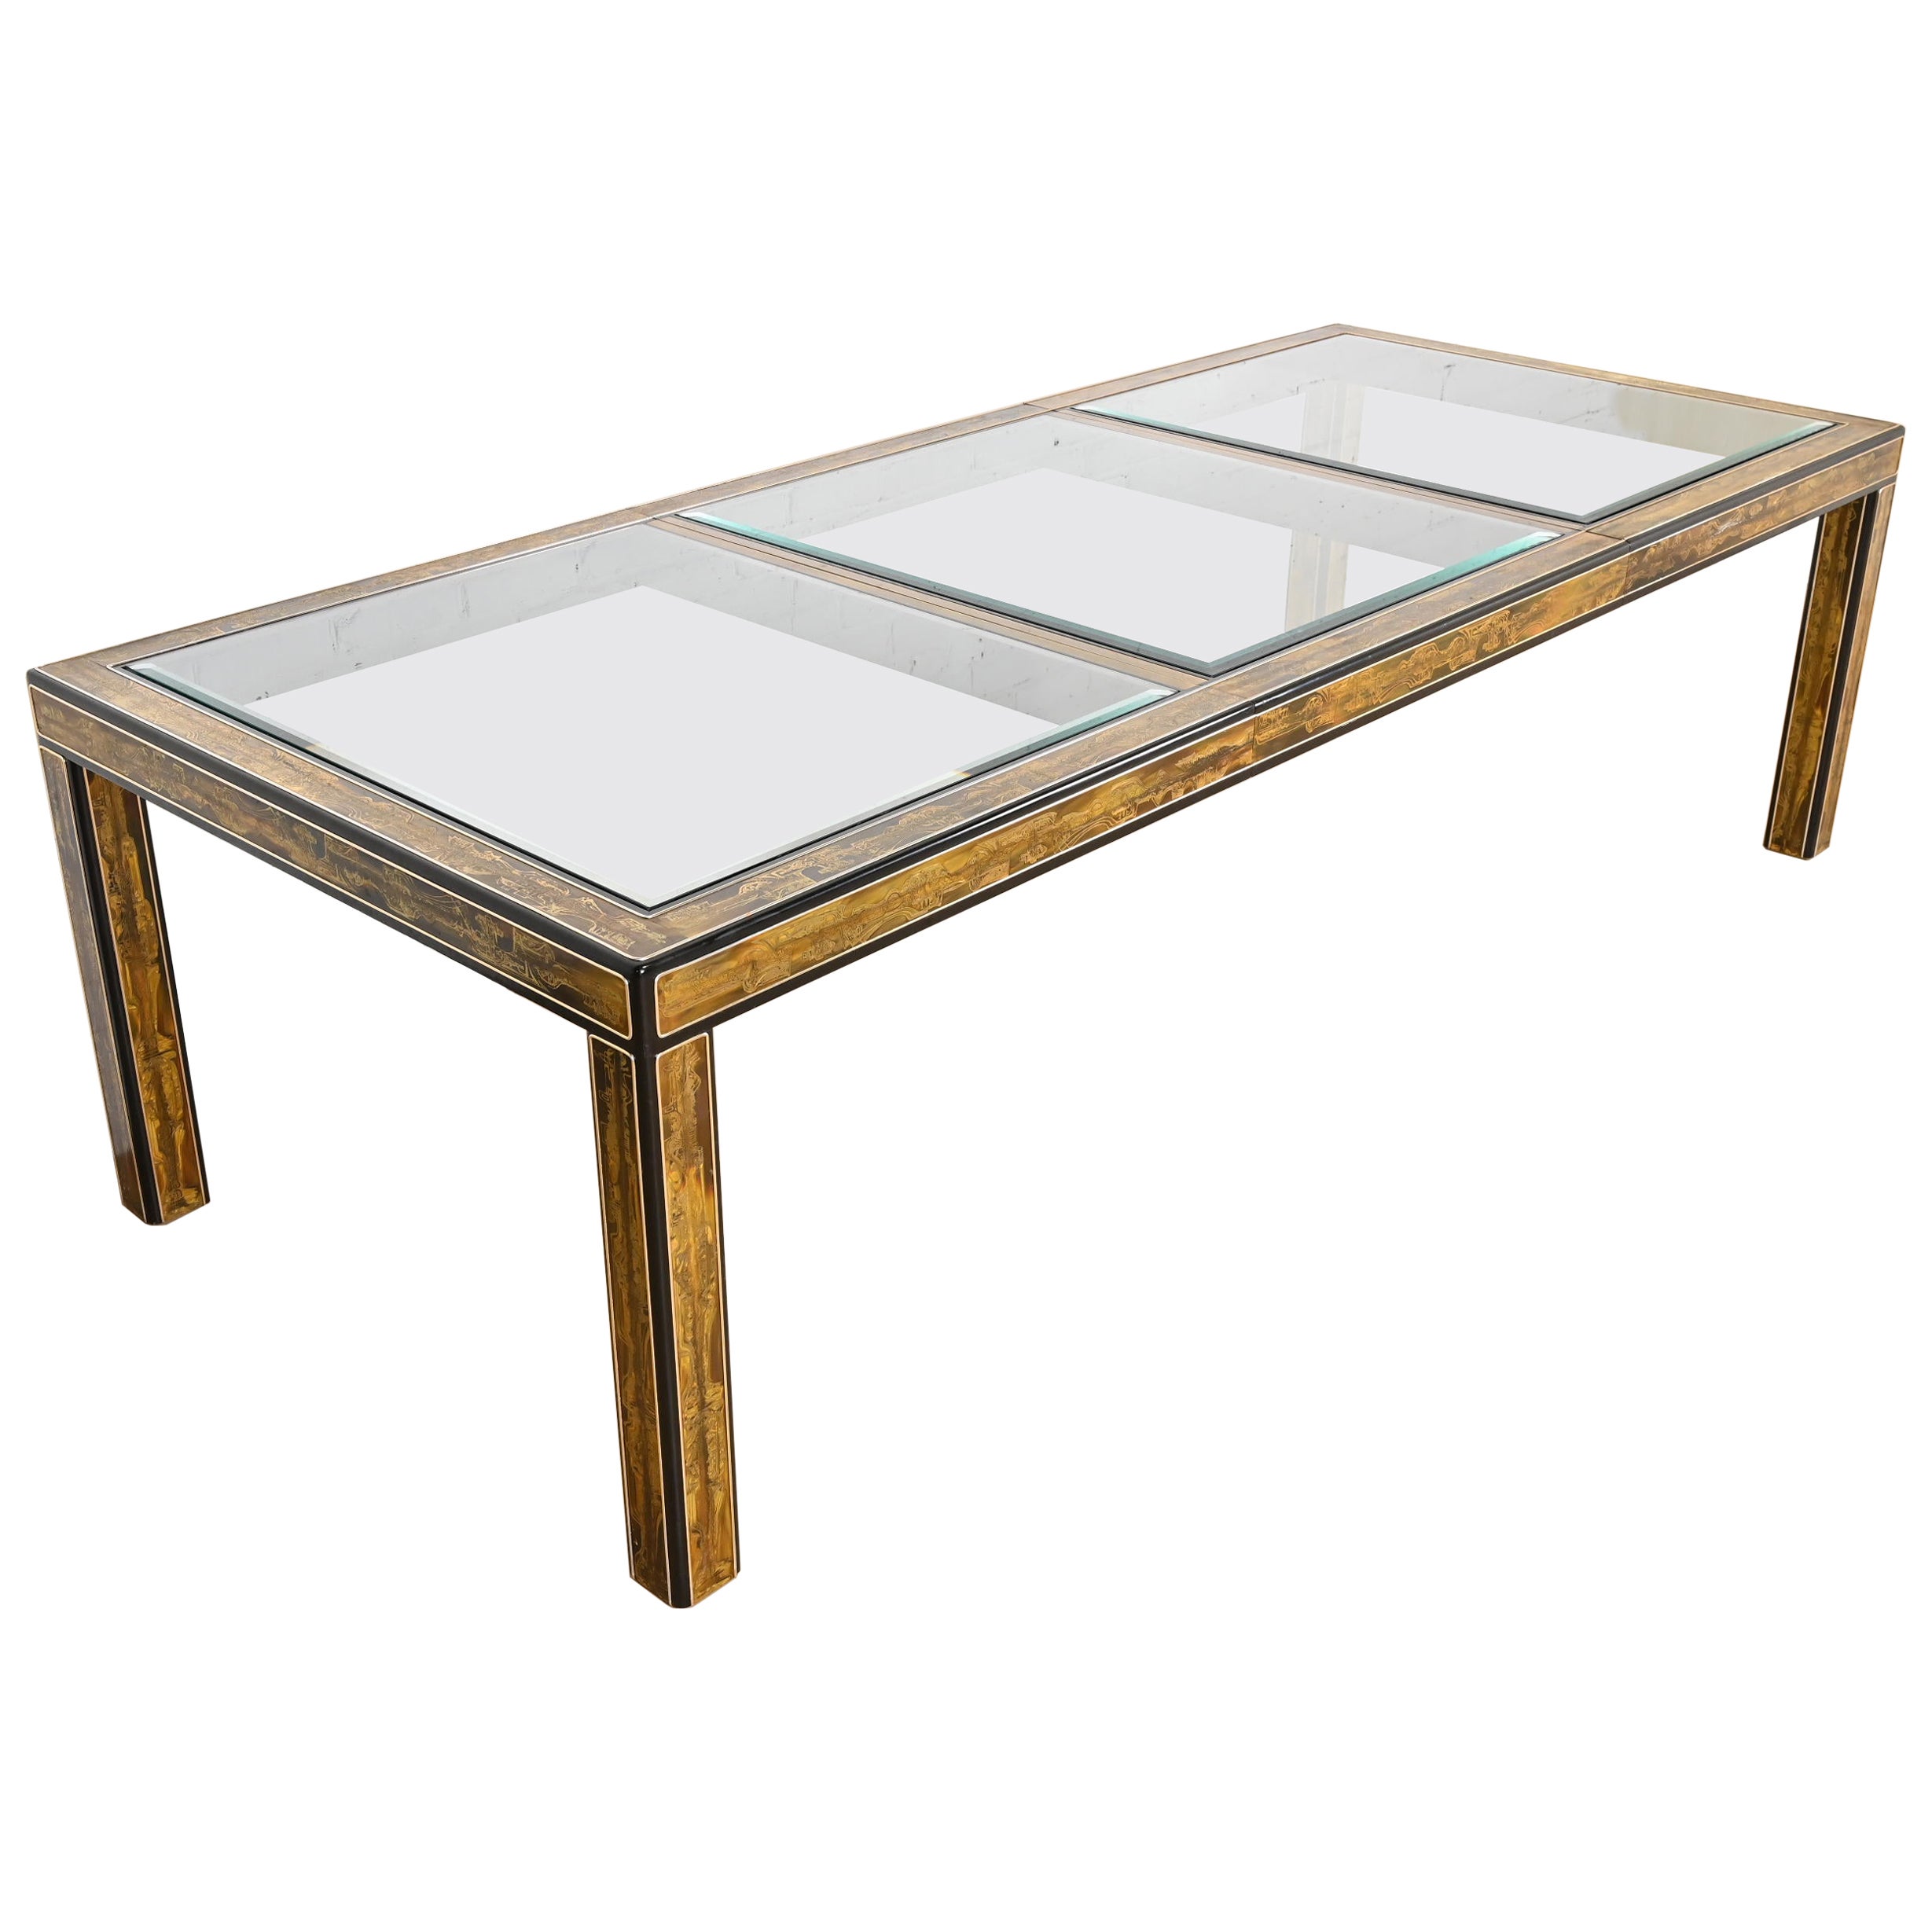 Bernhard Rohne for Mastercraft Acid Etched Brass Extension Dining Table, 1970s For Sale